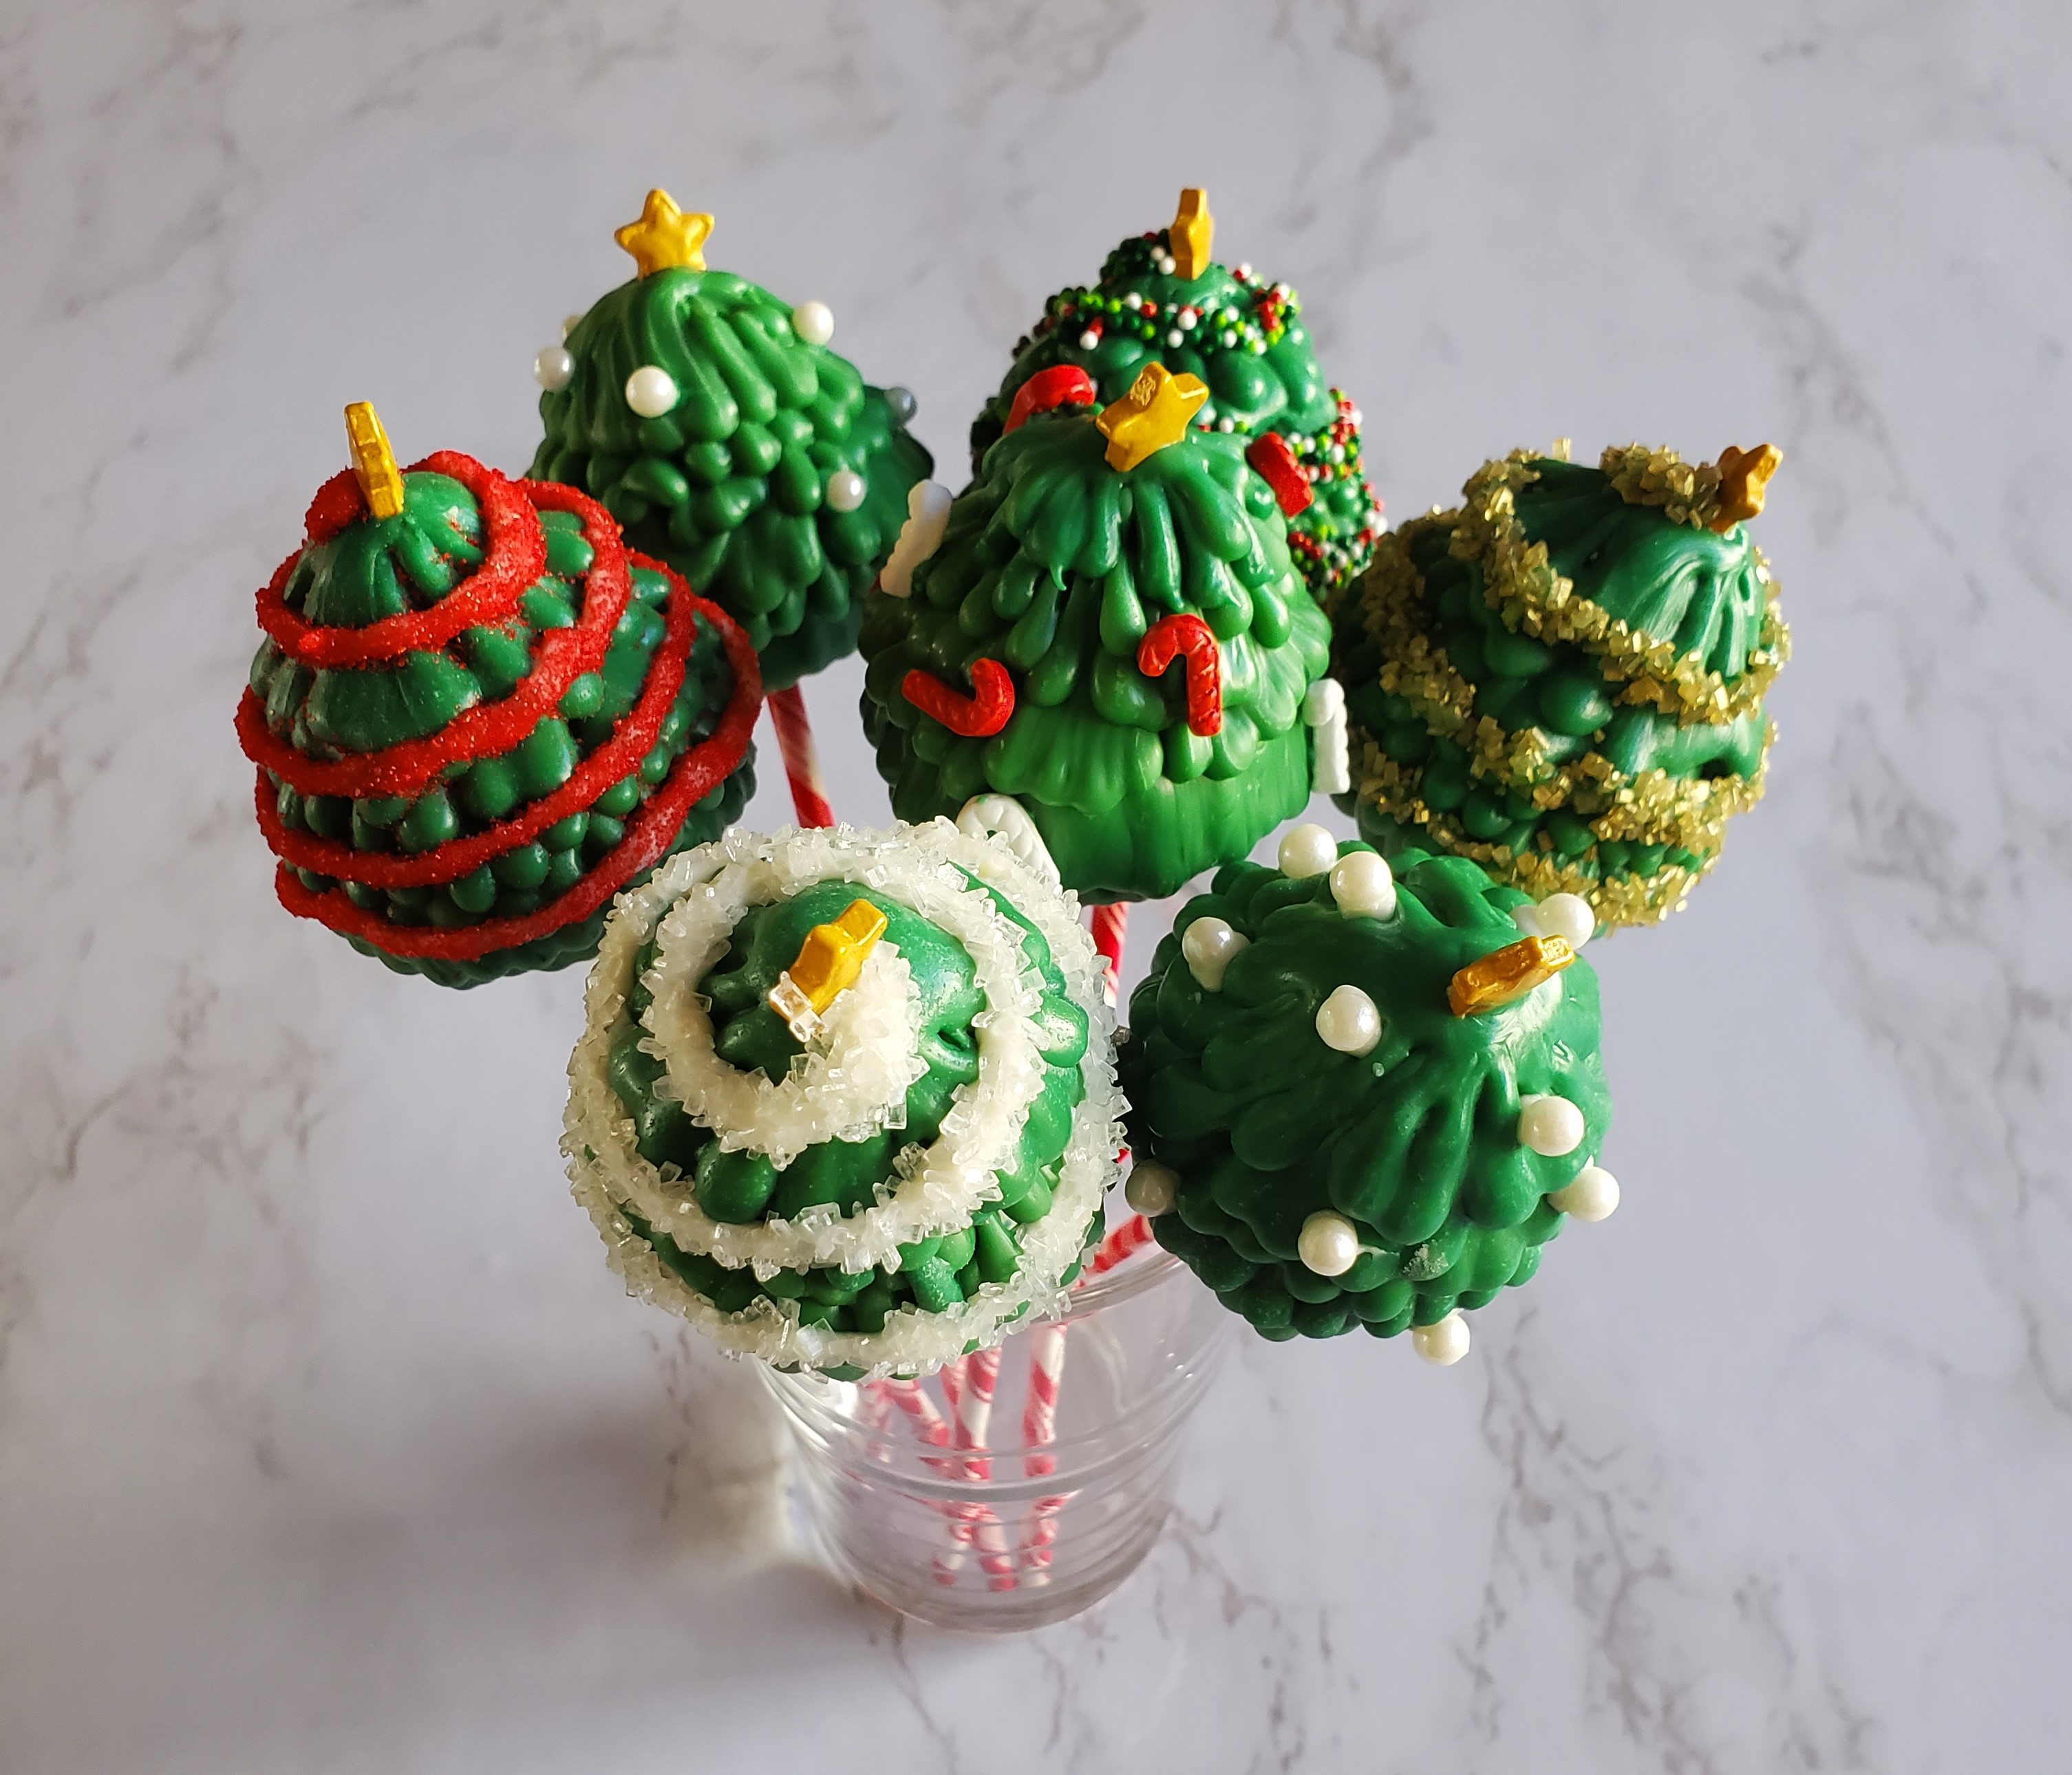 Christmas tree cake pops in a cup on a white marble background.